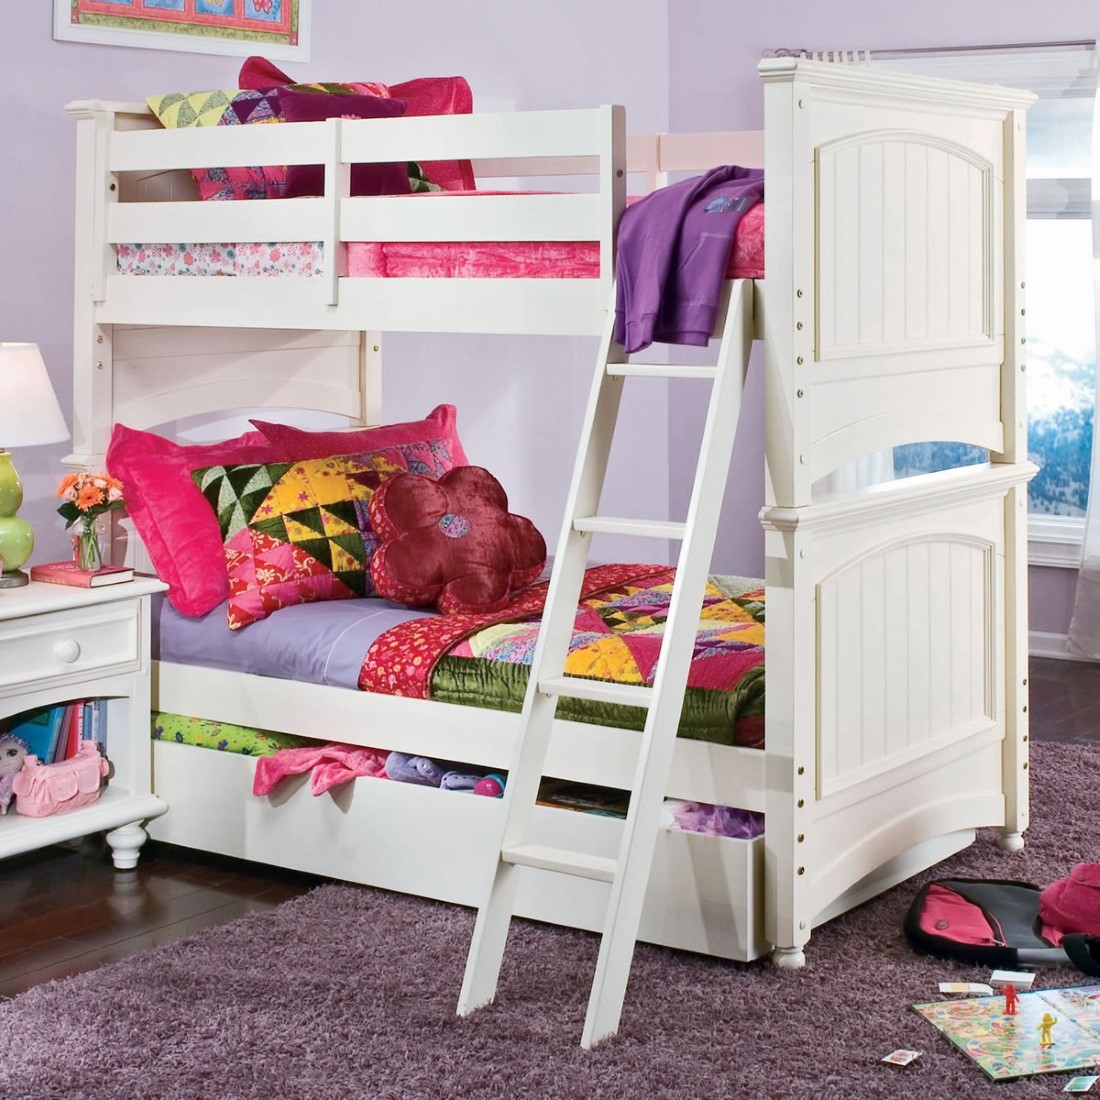 Twin Loft Feature Cute Twin Loft Bed Furniture Feature White Stairs And Large Kids Rug Ideas Beside White Drawers Plus Green Table Lights Kids Room 30 Functional Twin Loft Bed Design Furniture With Desk For Kids